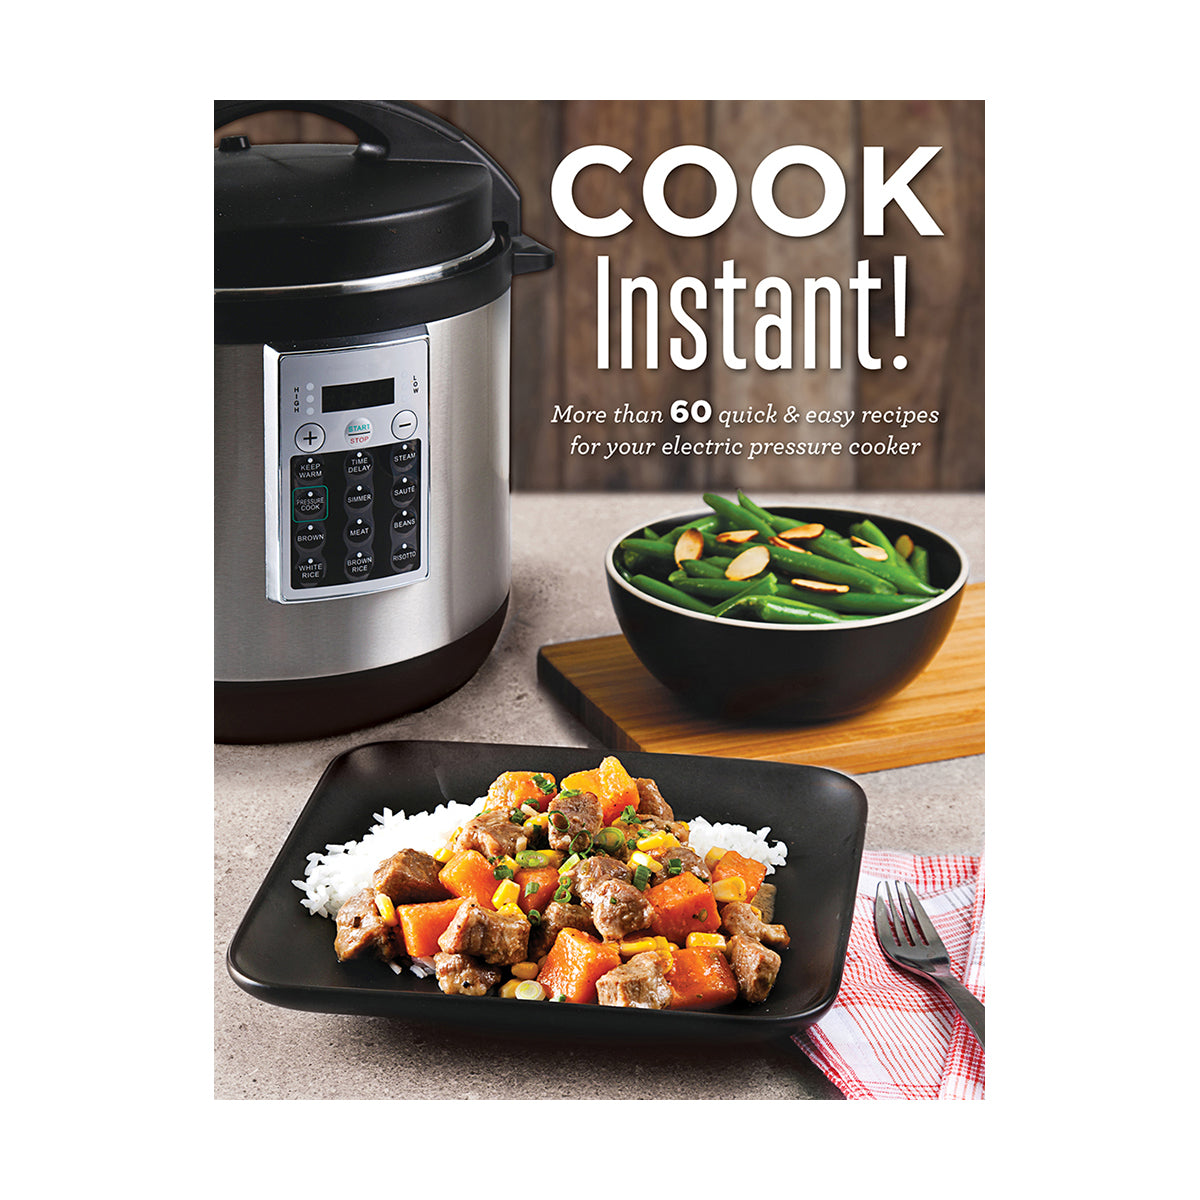 Cook Instant! More Than 80 Quick & Easy Recipes for Your Electric Pressure Cooker